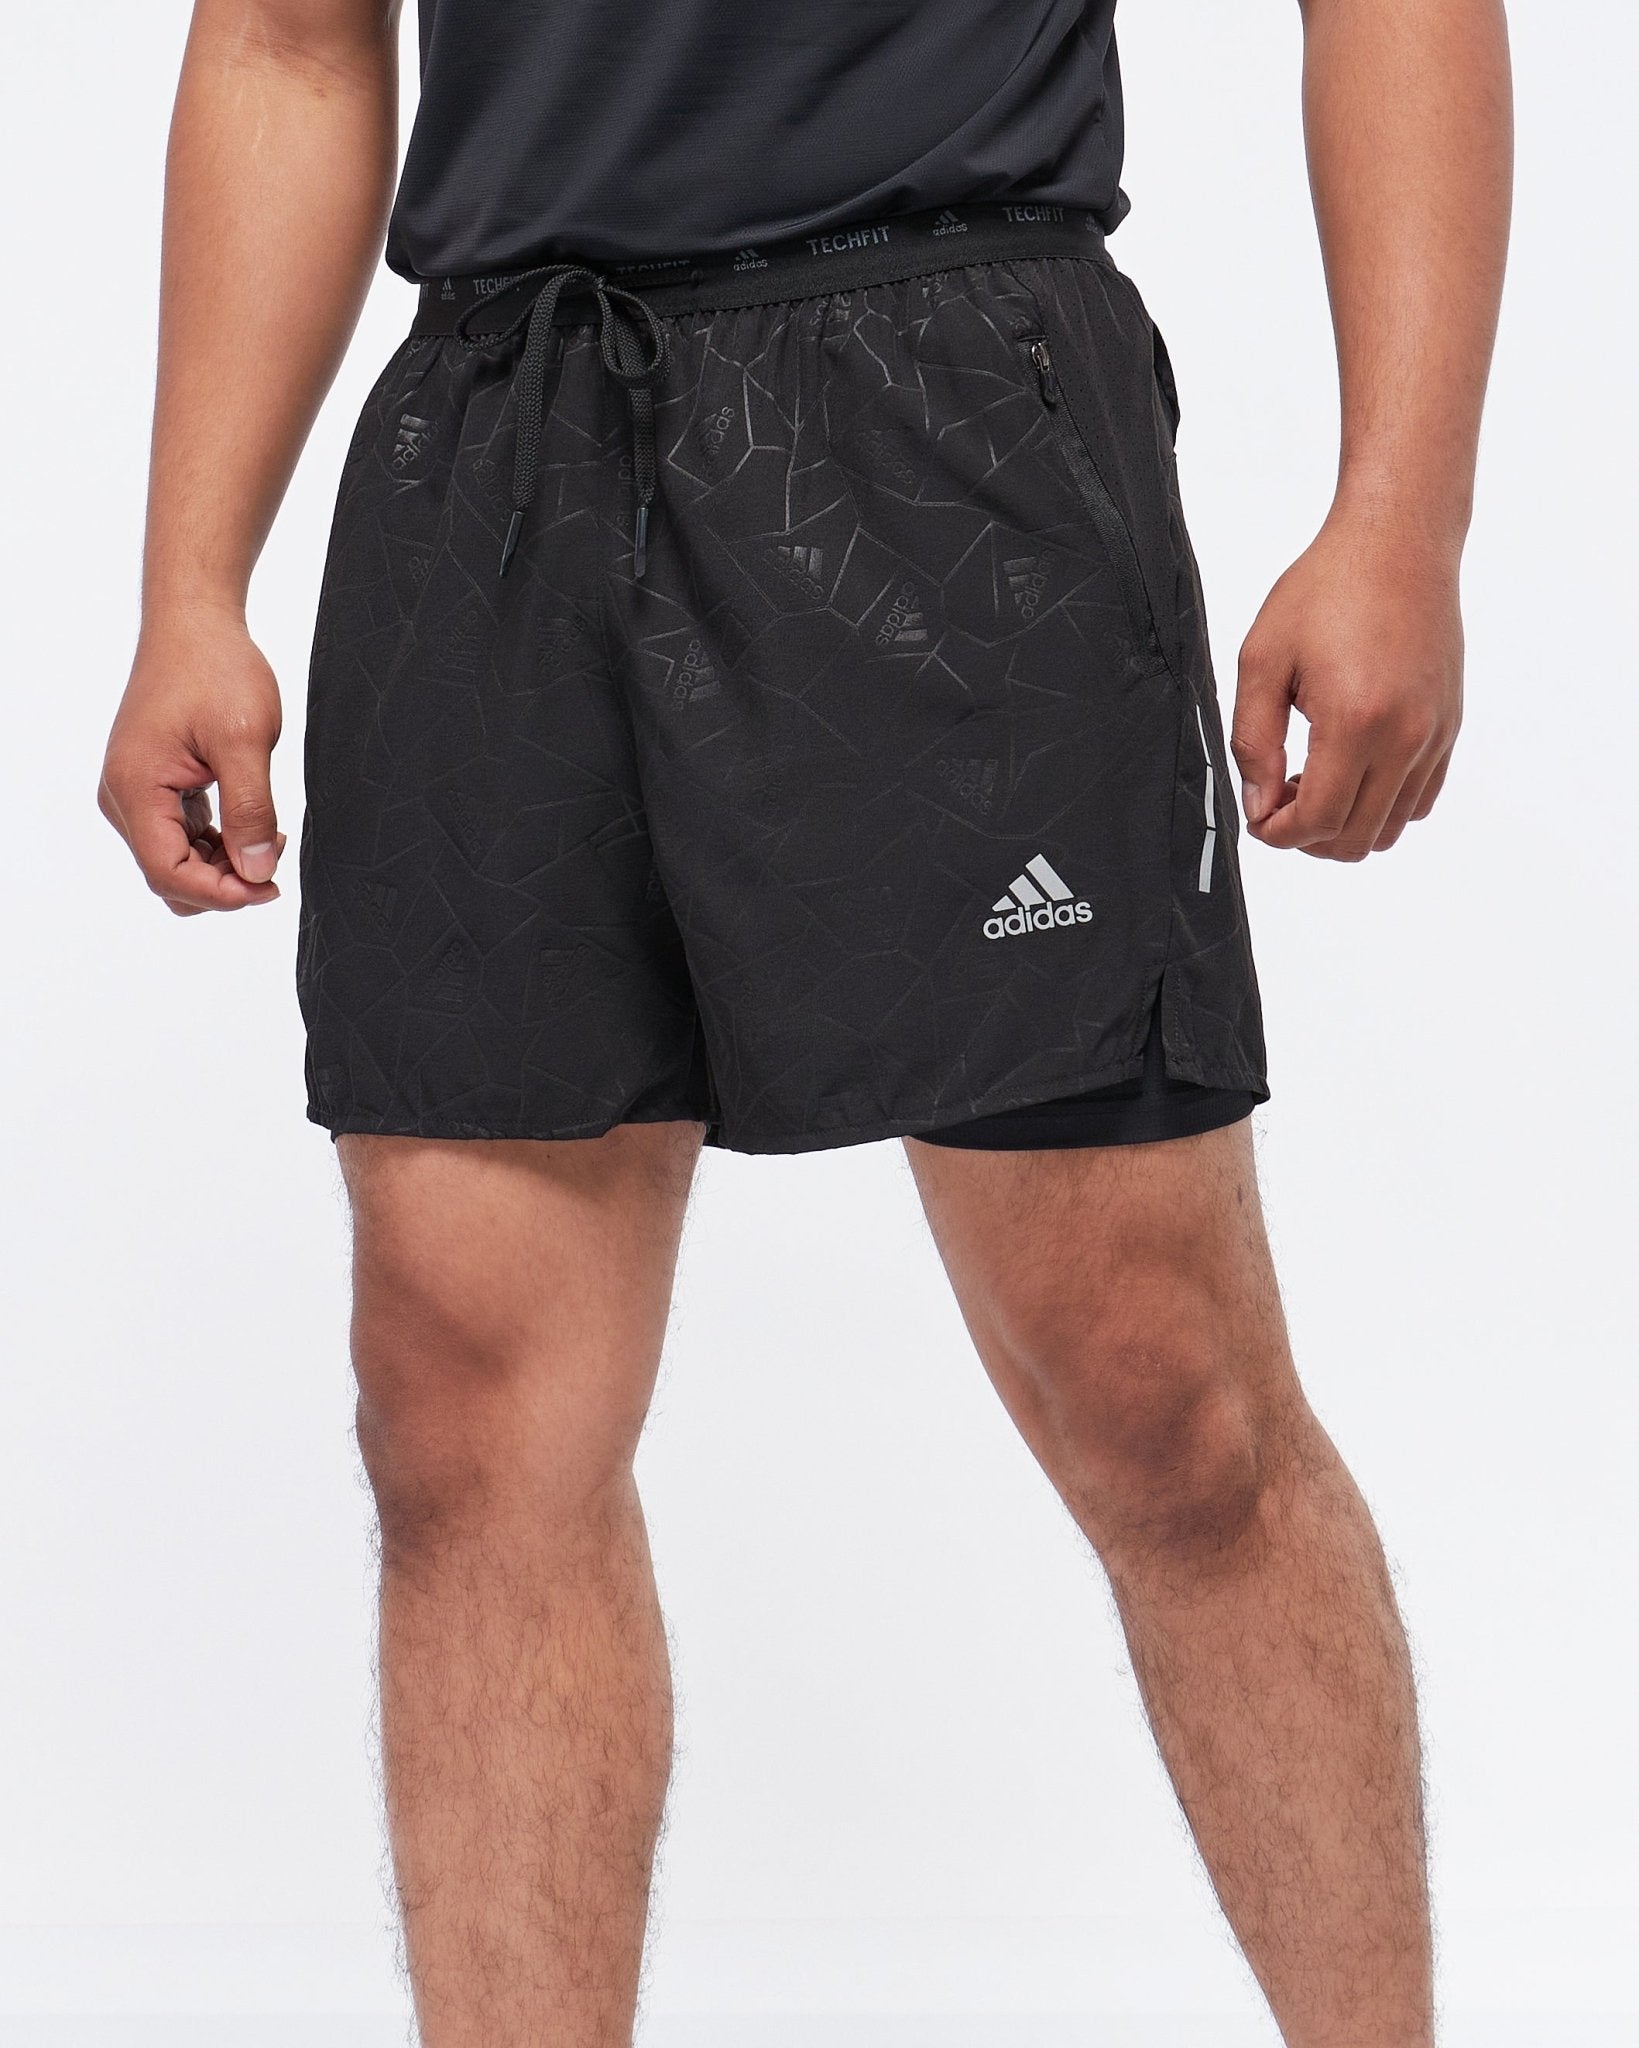 MOI OUTFIT-AD Lightweight 2 in 1 Men Sport Shorts 13.90